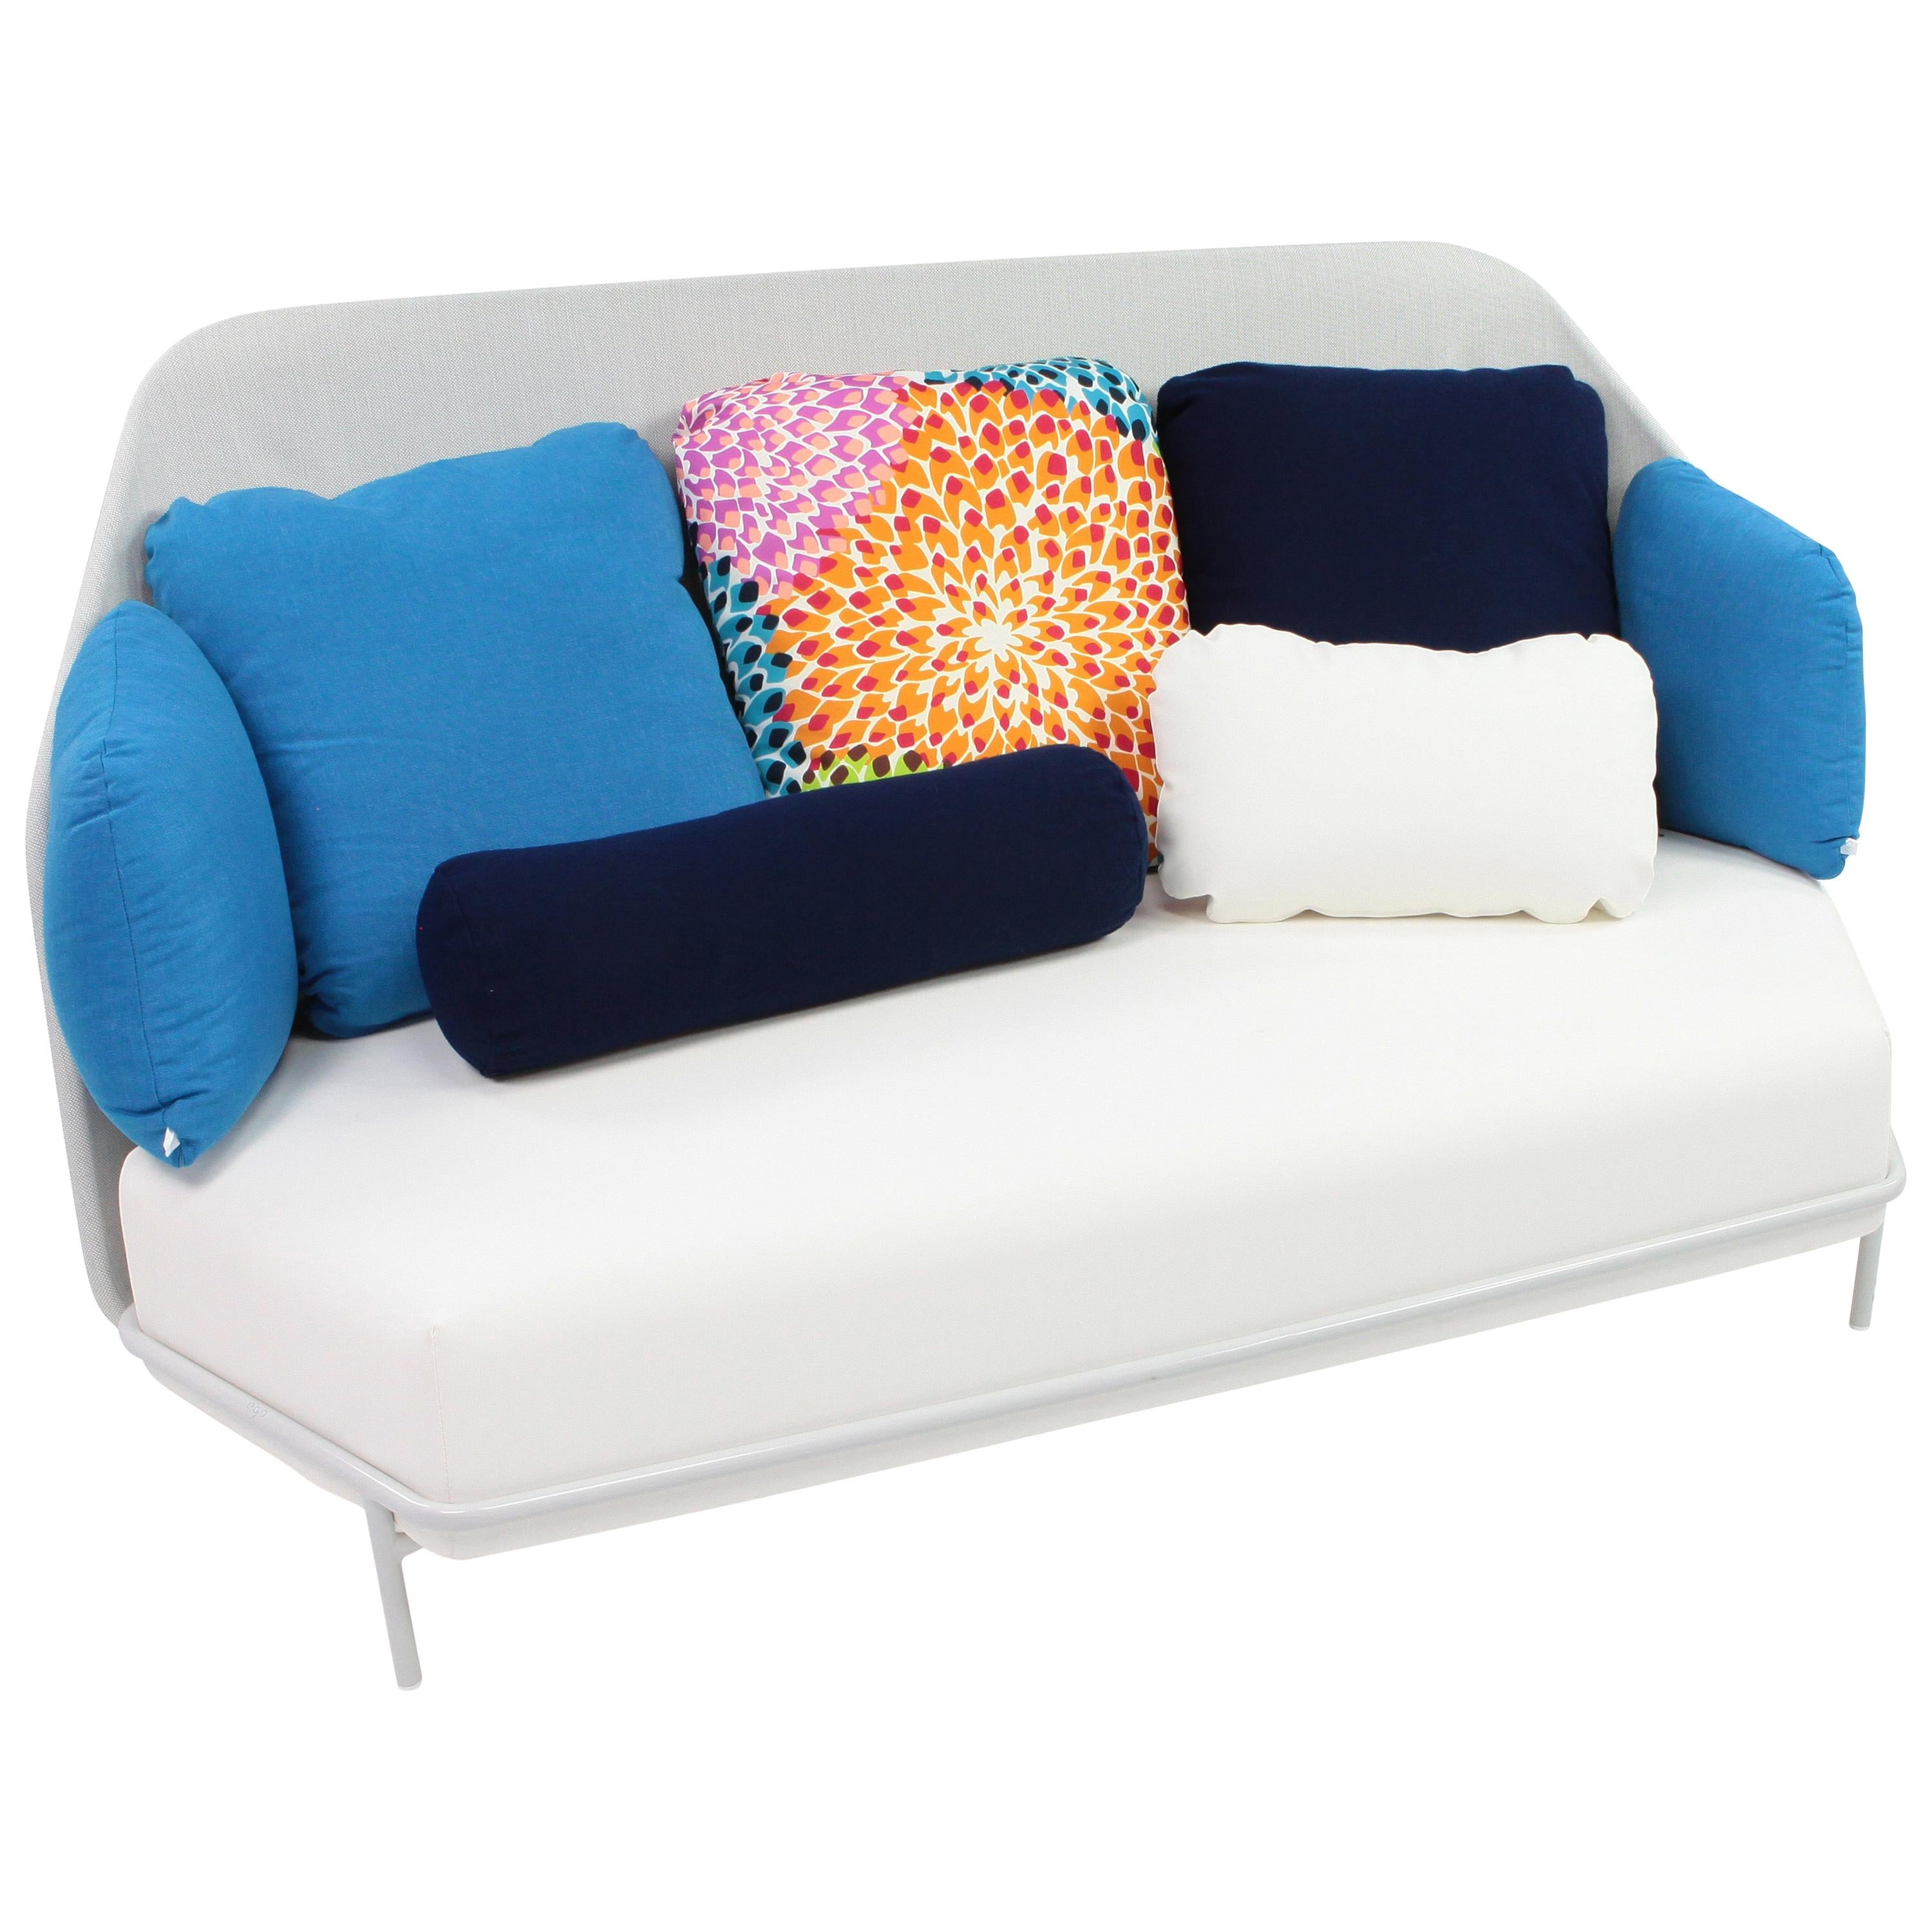 Hive collection set includes:

1x Hive one
Measures: W 37 X D 35.8 X H 38 In
Frame finish: FT42 chameleon grey
Cushions included:
(1) Seat fabric: M01 white marine vinyle
(1) Back pillow: A03 night blue
(2) Arm pillow: T22 white sand
(1)